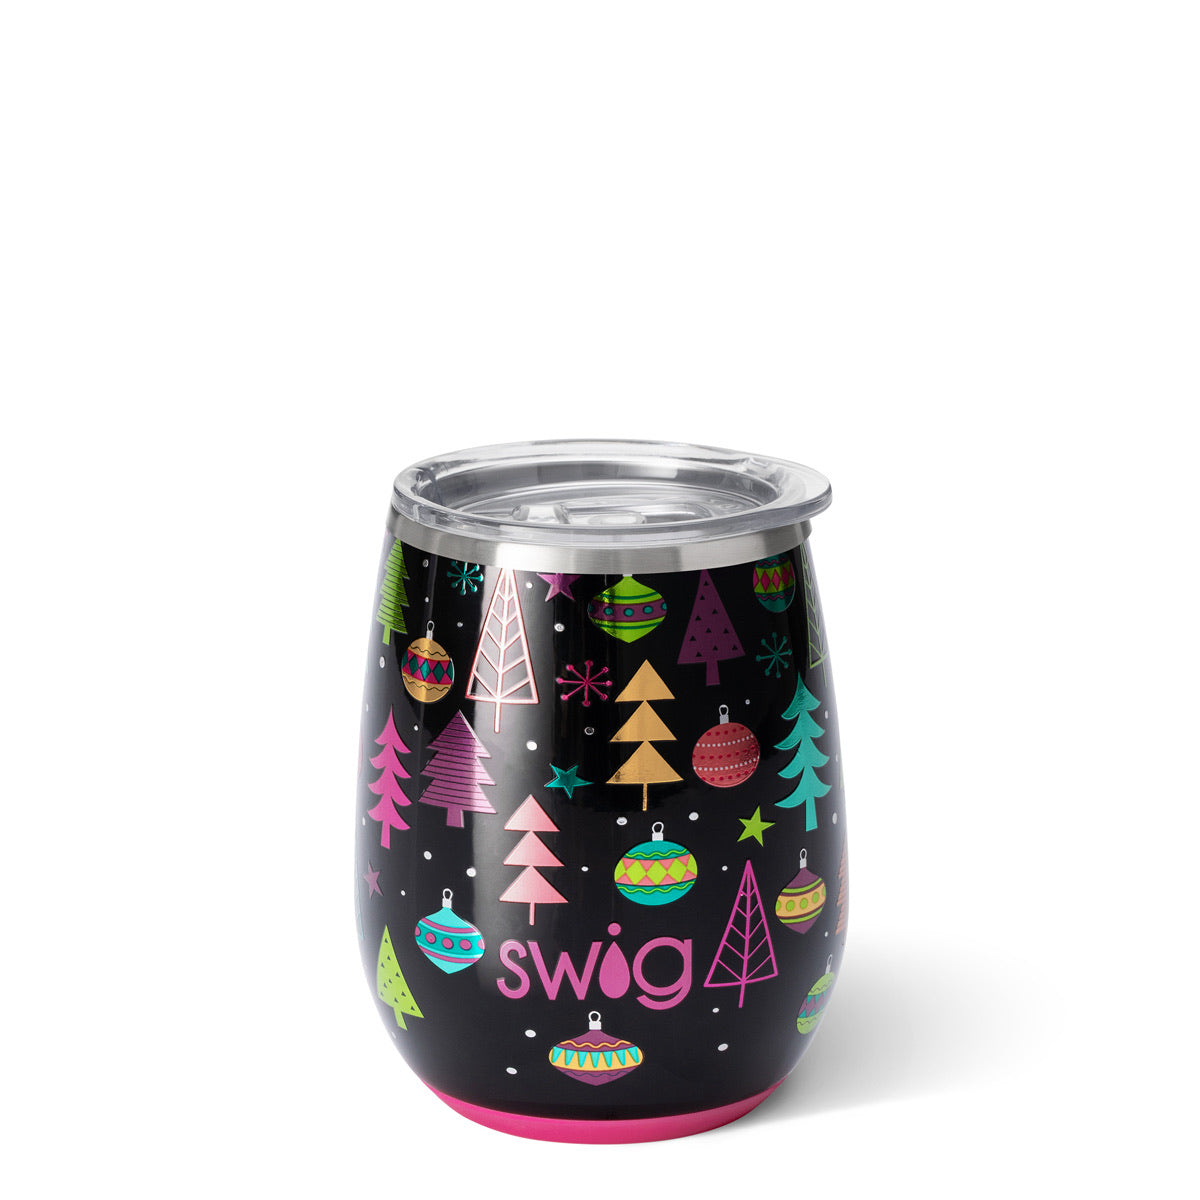 Swig Holiday Gift Sets: Tumblers, Stemless Cups, & More